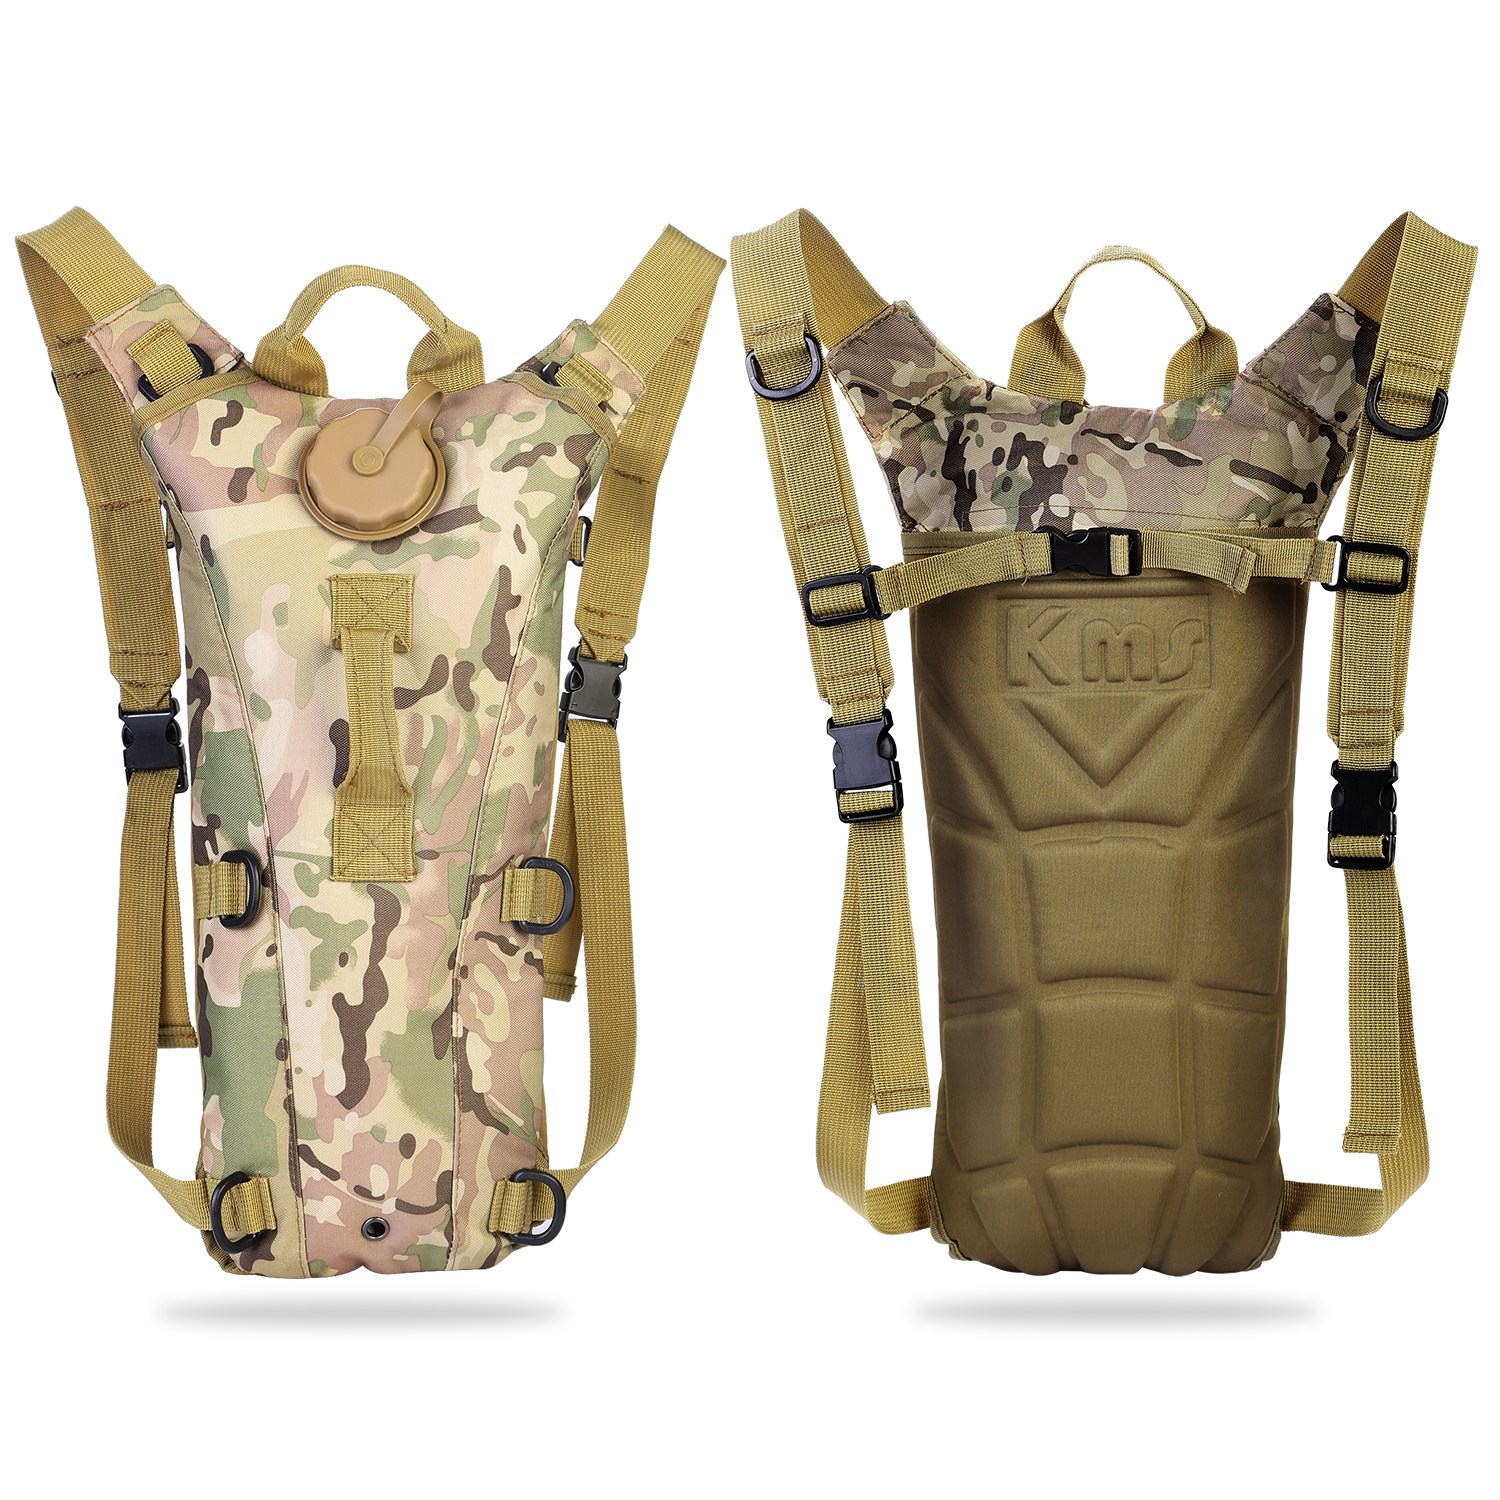 iMounTEK Water Backpack Hydration Pack 3L Drink Backpack for Cycling Climbing Running, Military Camo - image 3 of 8